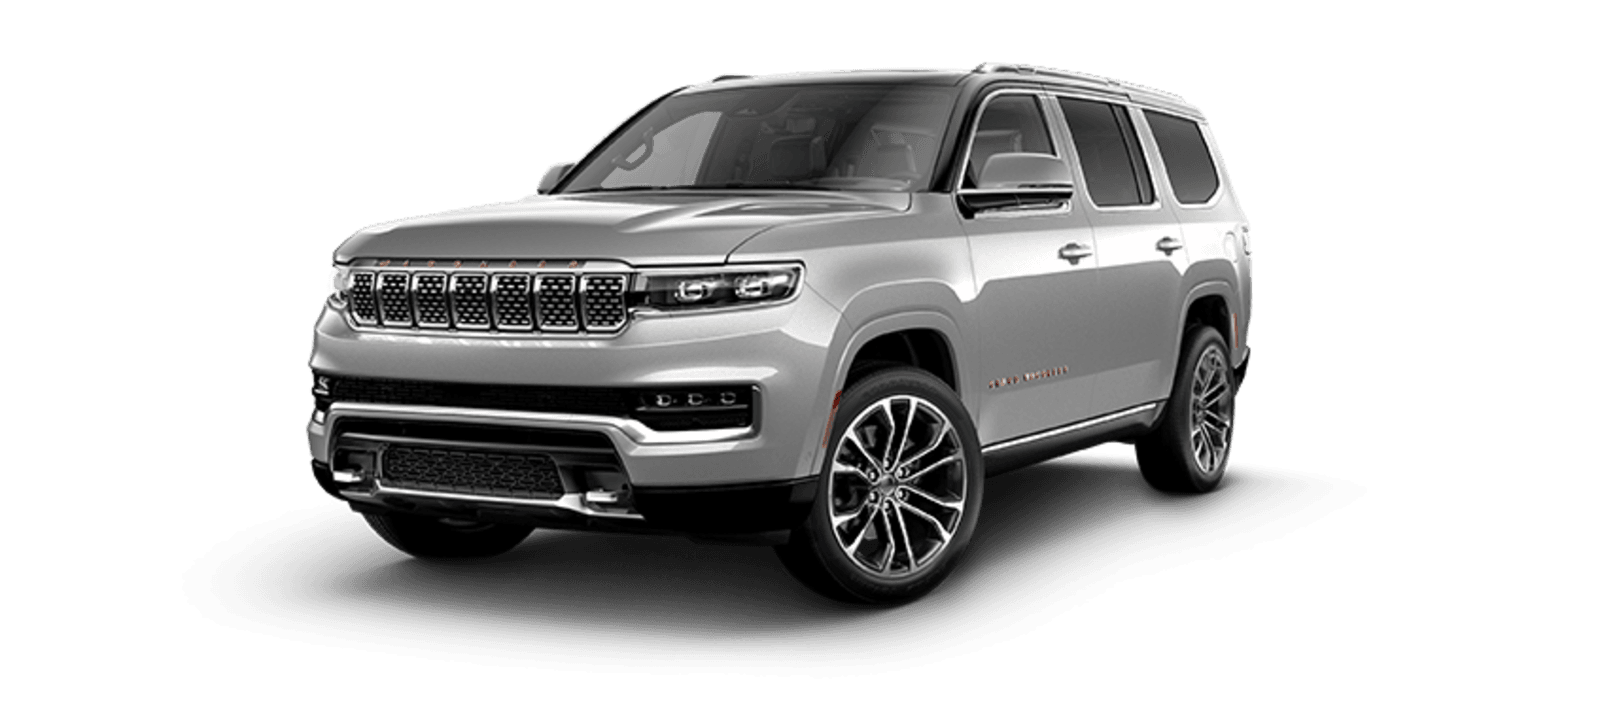 2021 Jeep Wagoneer Full View in Silver Zynith with Wheels